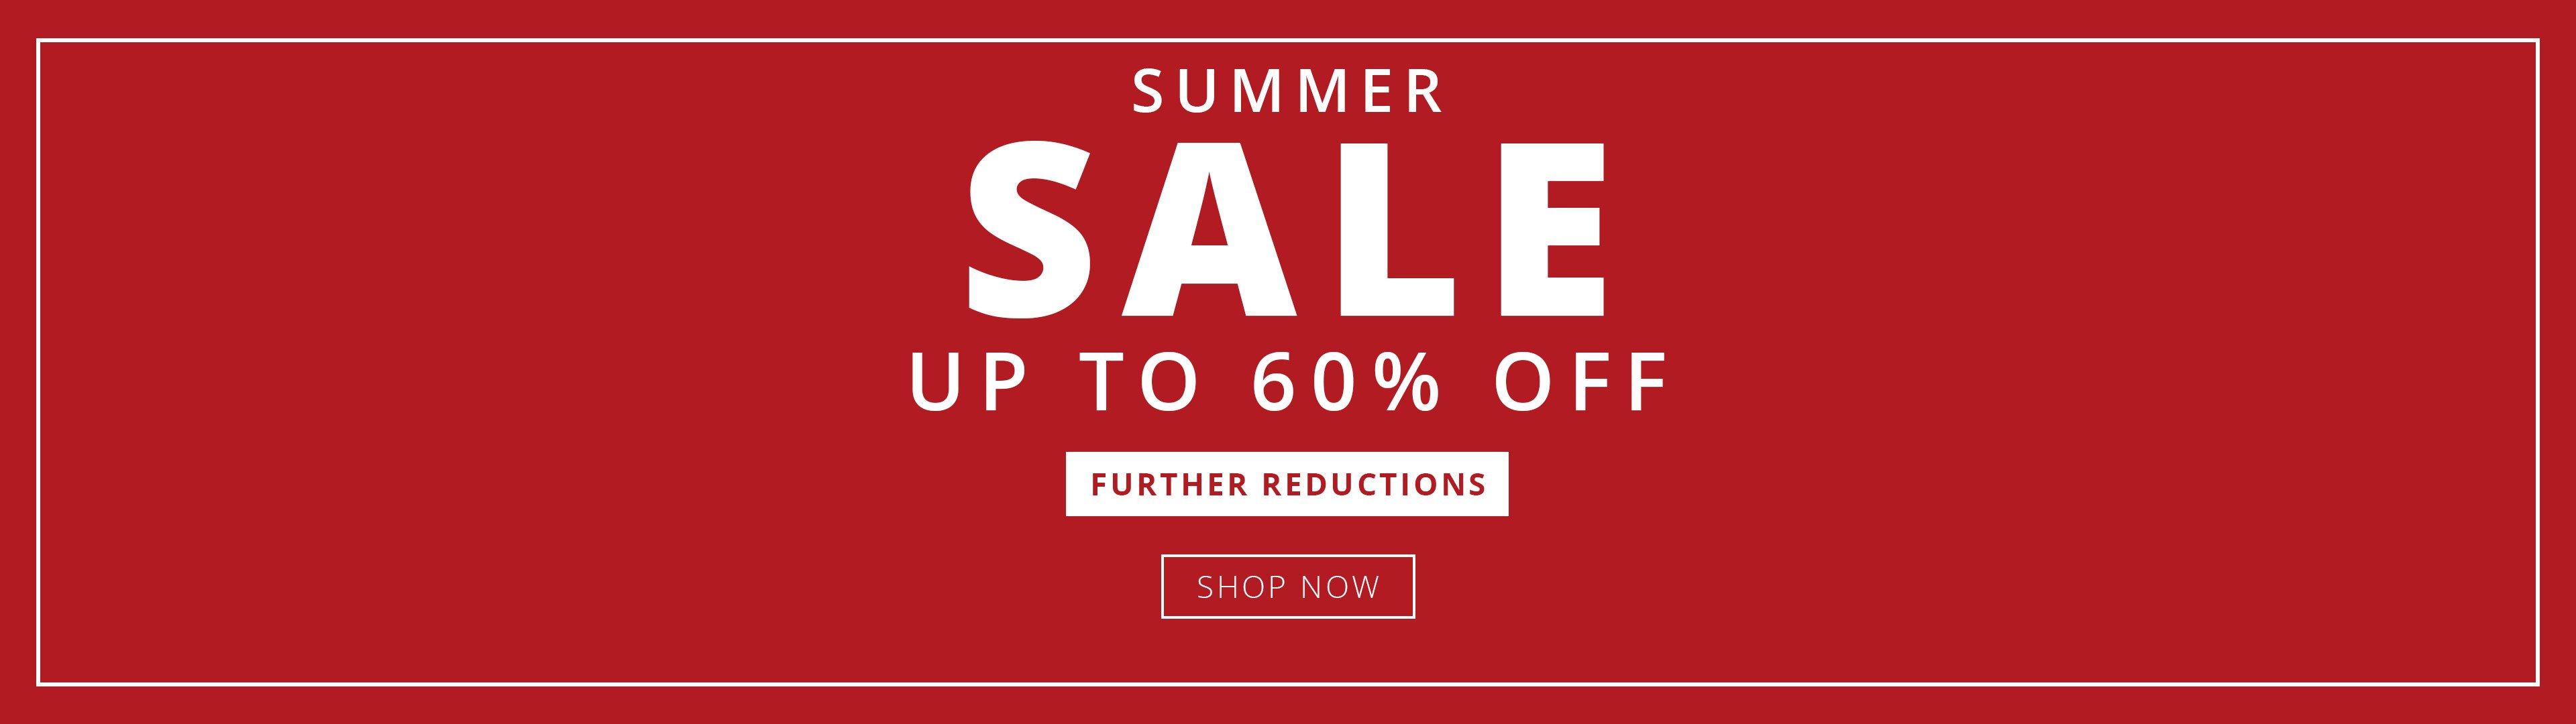 Summer Sale - Up To 60% Off